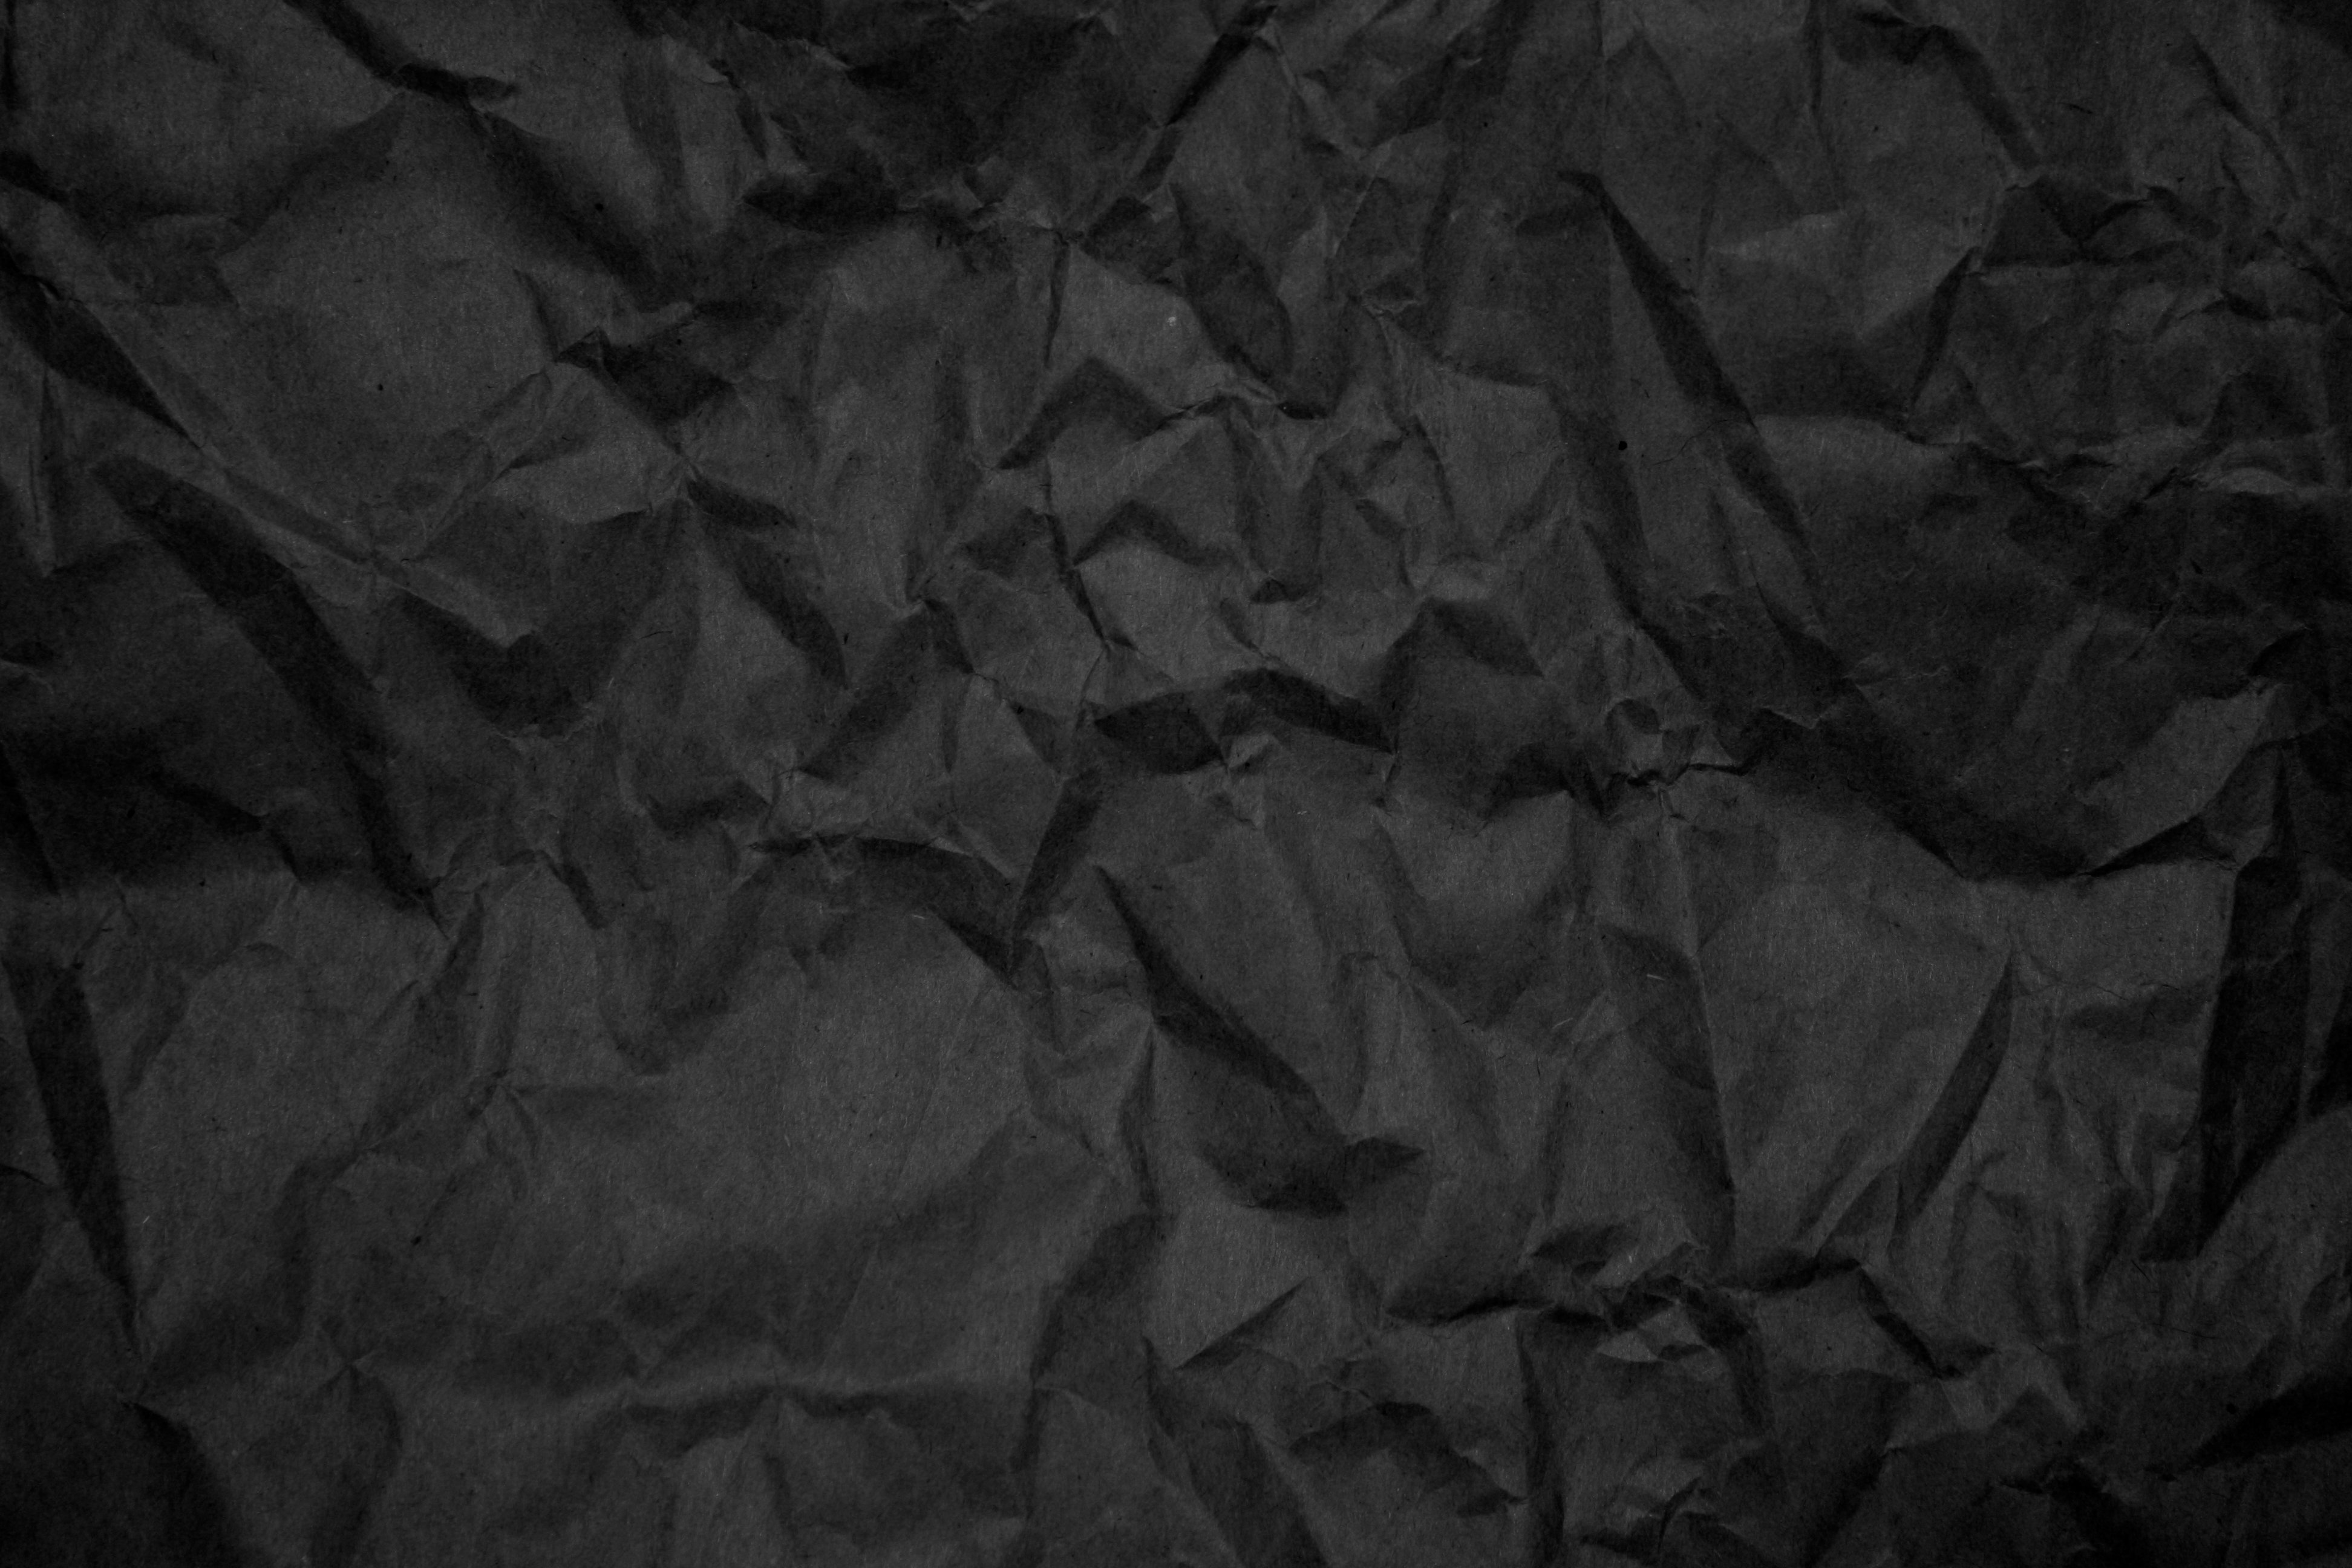 Paper Texture Photos, Download The BEST Free Paper Texture Stock